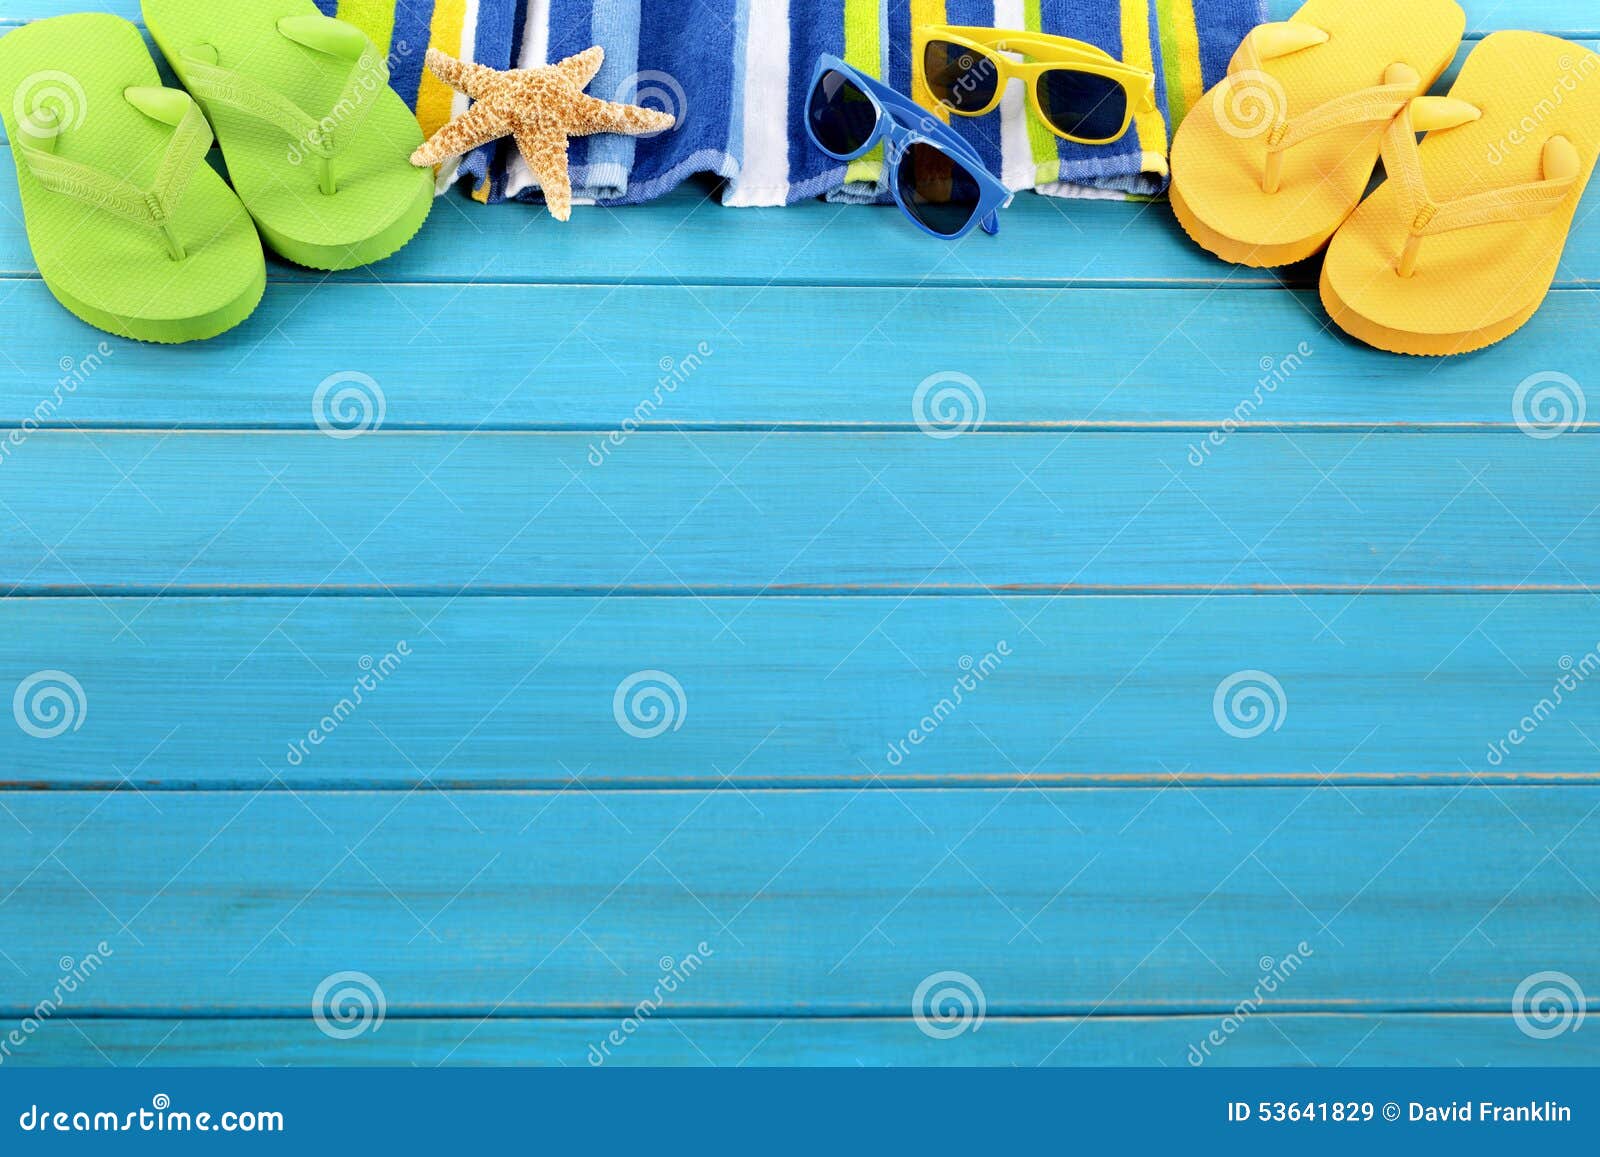 Summer Beach Background Border Copy Space Stock Image - Image of plank ...